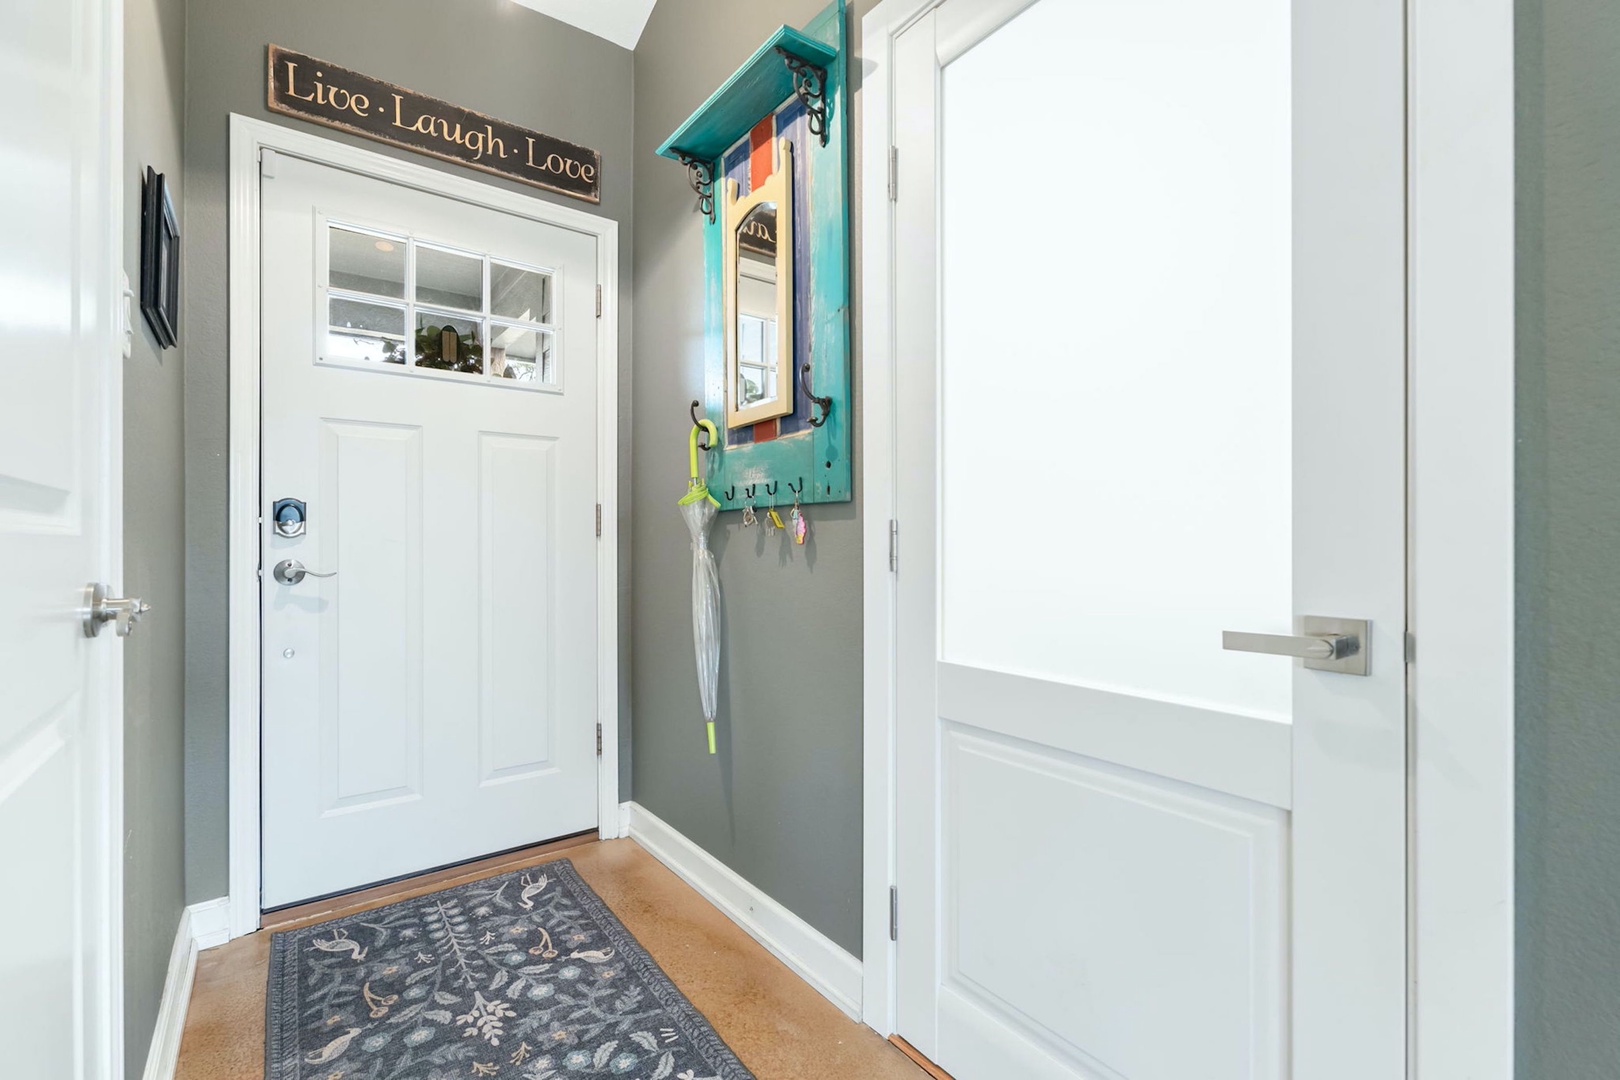 A bright, cheerful entryway will welcome you home